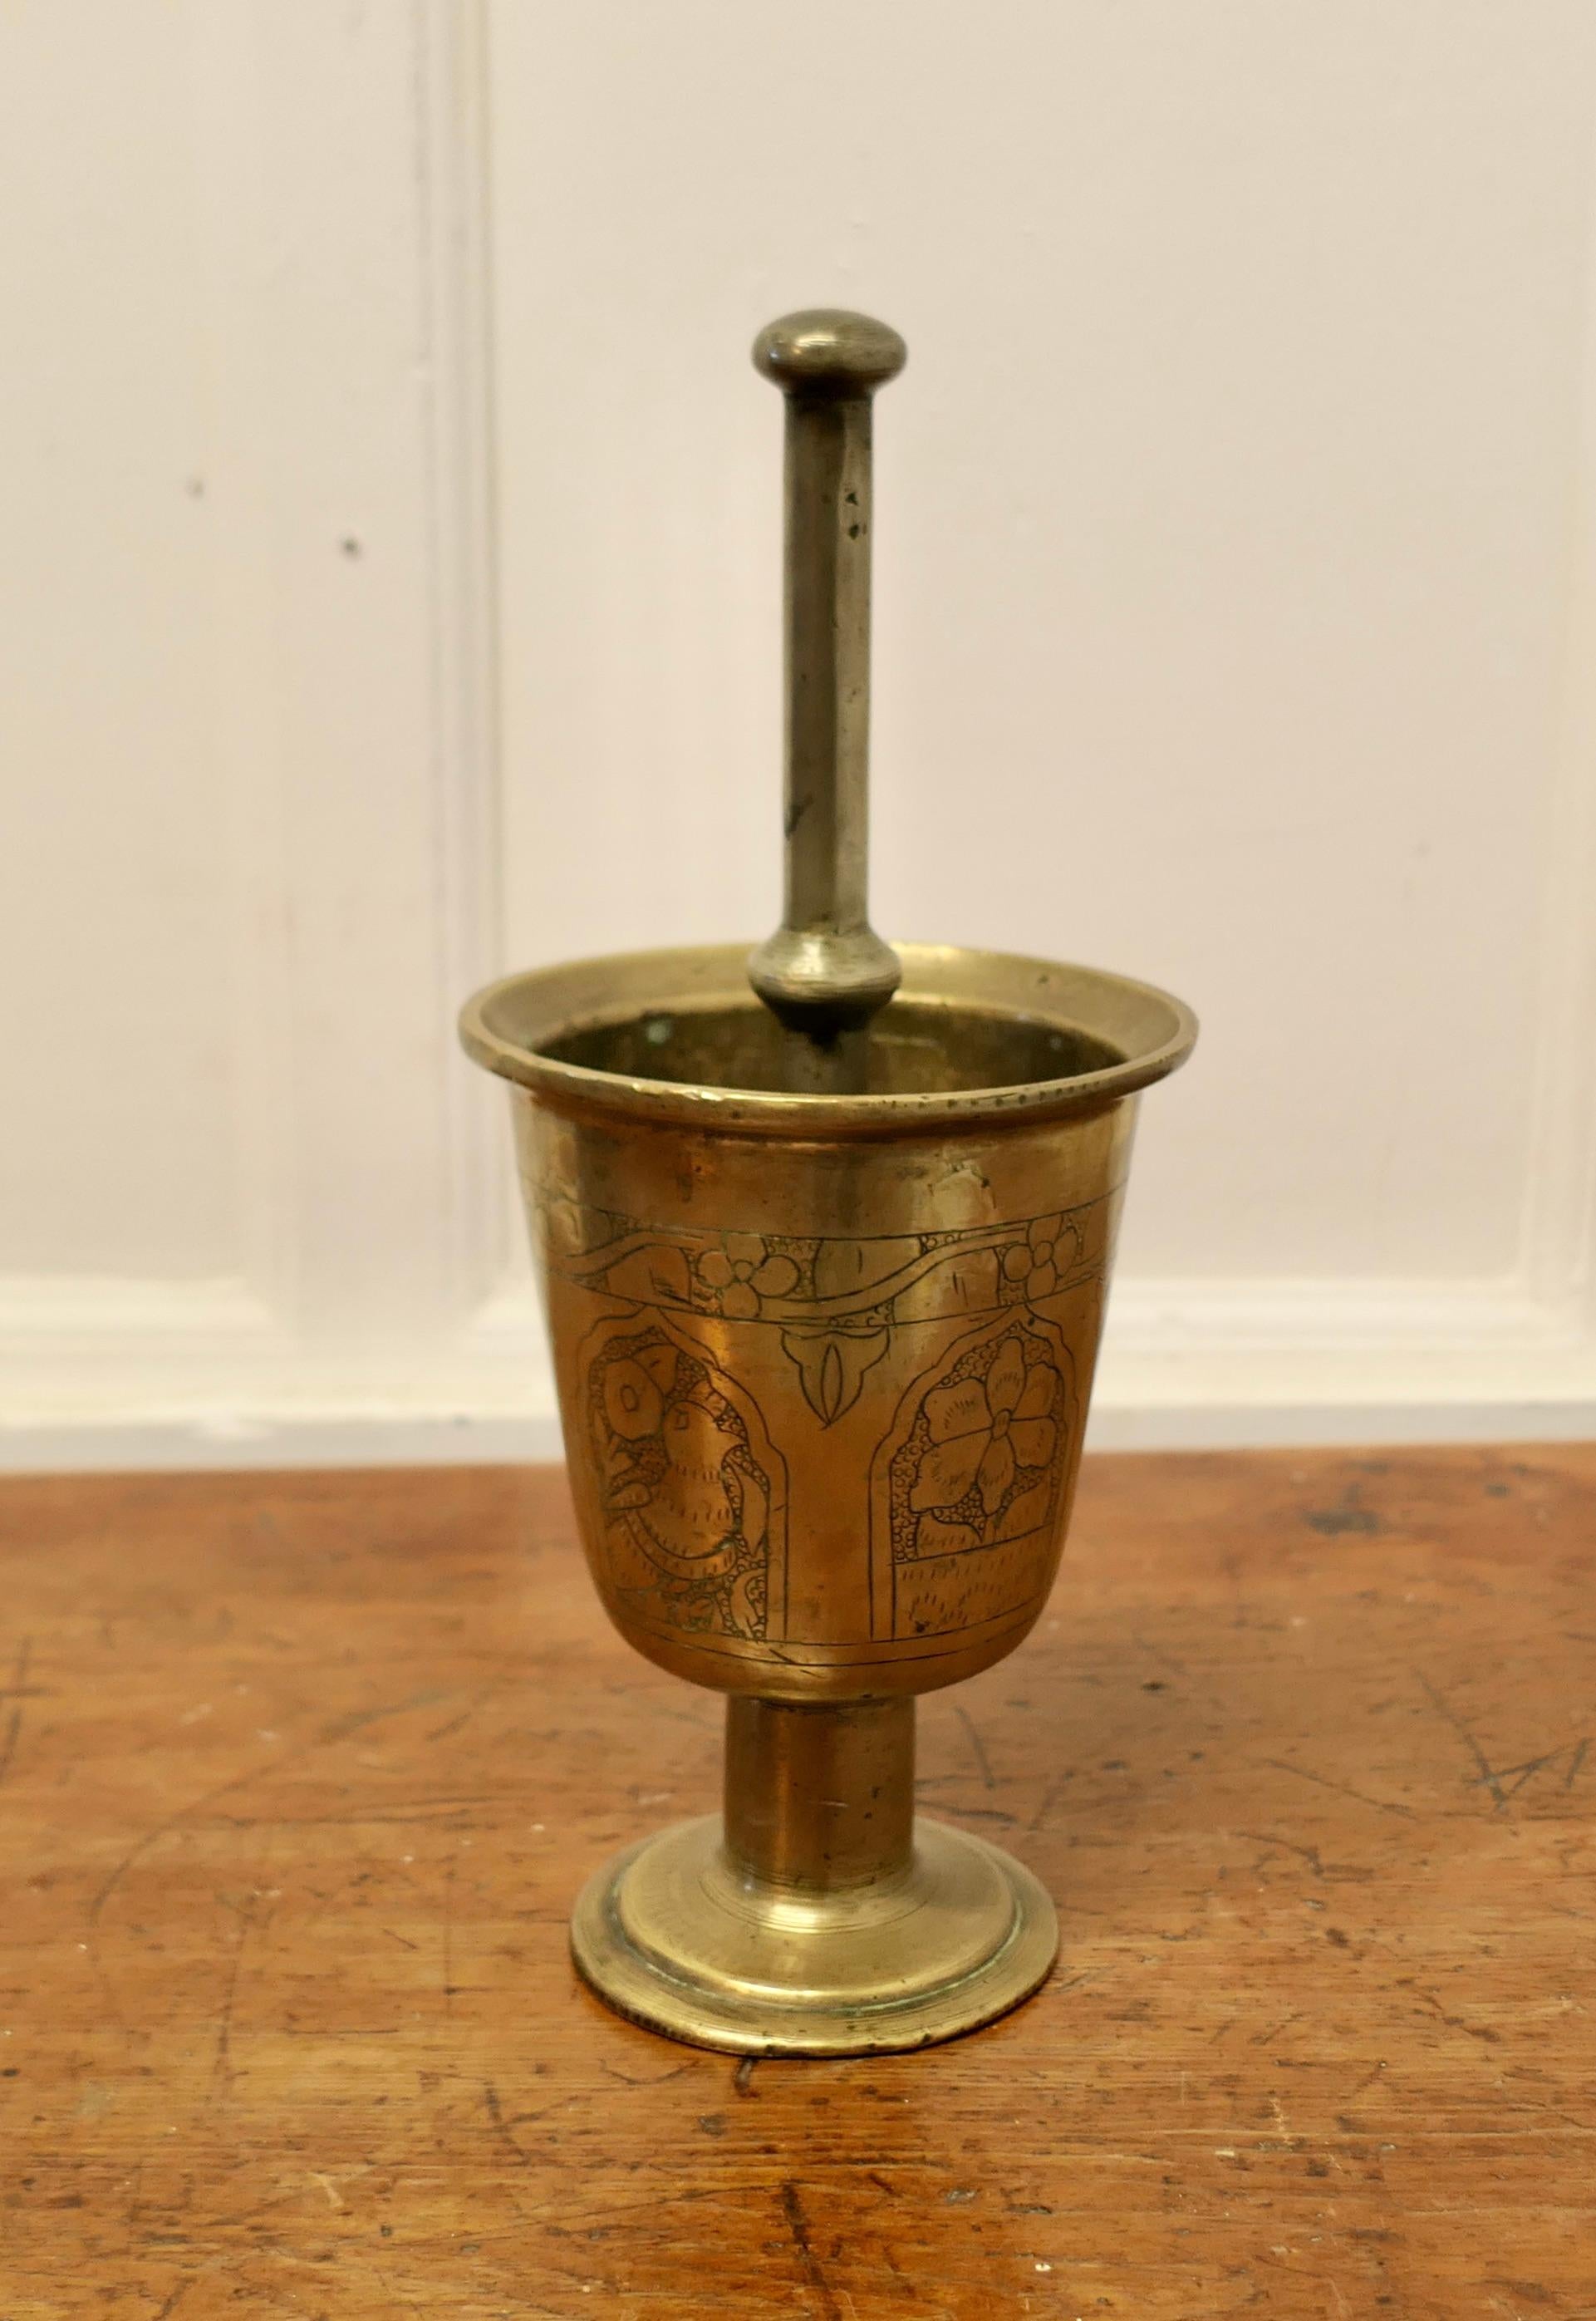 Oriental Brass Pestle and Mortar 

An unusual pair probably made for the preparation of herbal treatments The mortar is clean inside so it could be used in your kitchen, this is a very heavy pair, the Mortar is decorated with Flower and Birds
In